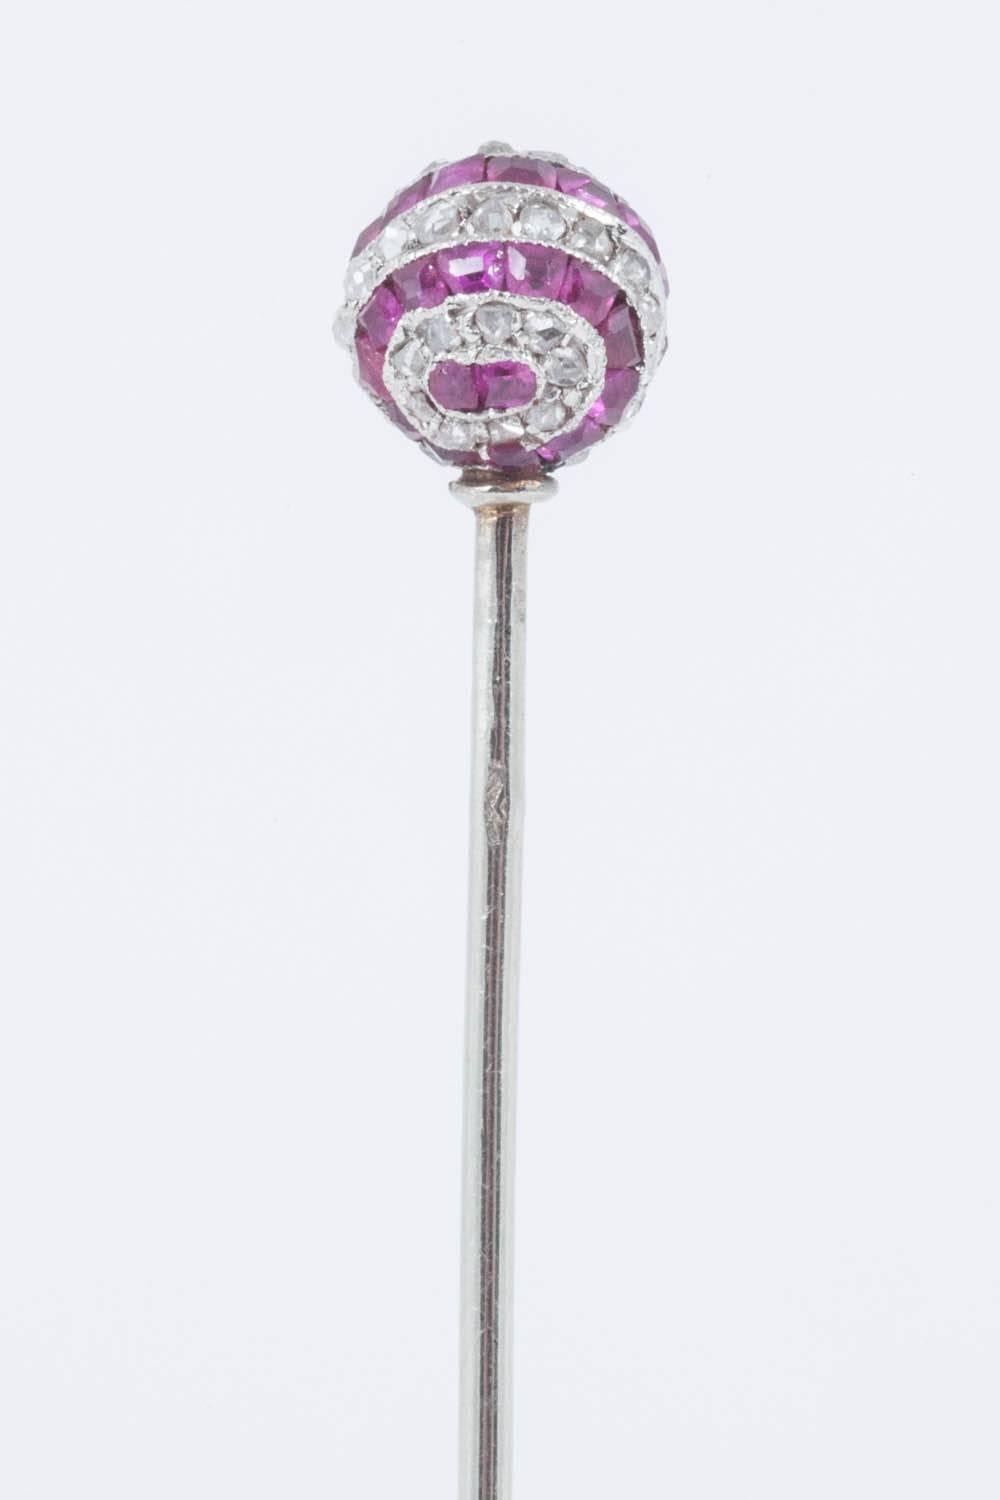 A platinum mounted tiepin in the form of a ball,set with rose cut diamonds,and calibre set,burma rubies of fine colour.French marks,probably made by Cartier or Lacloche,but not signed C,1900